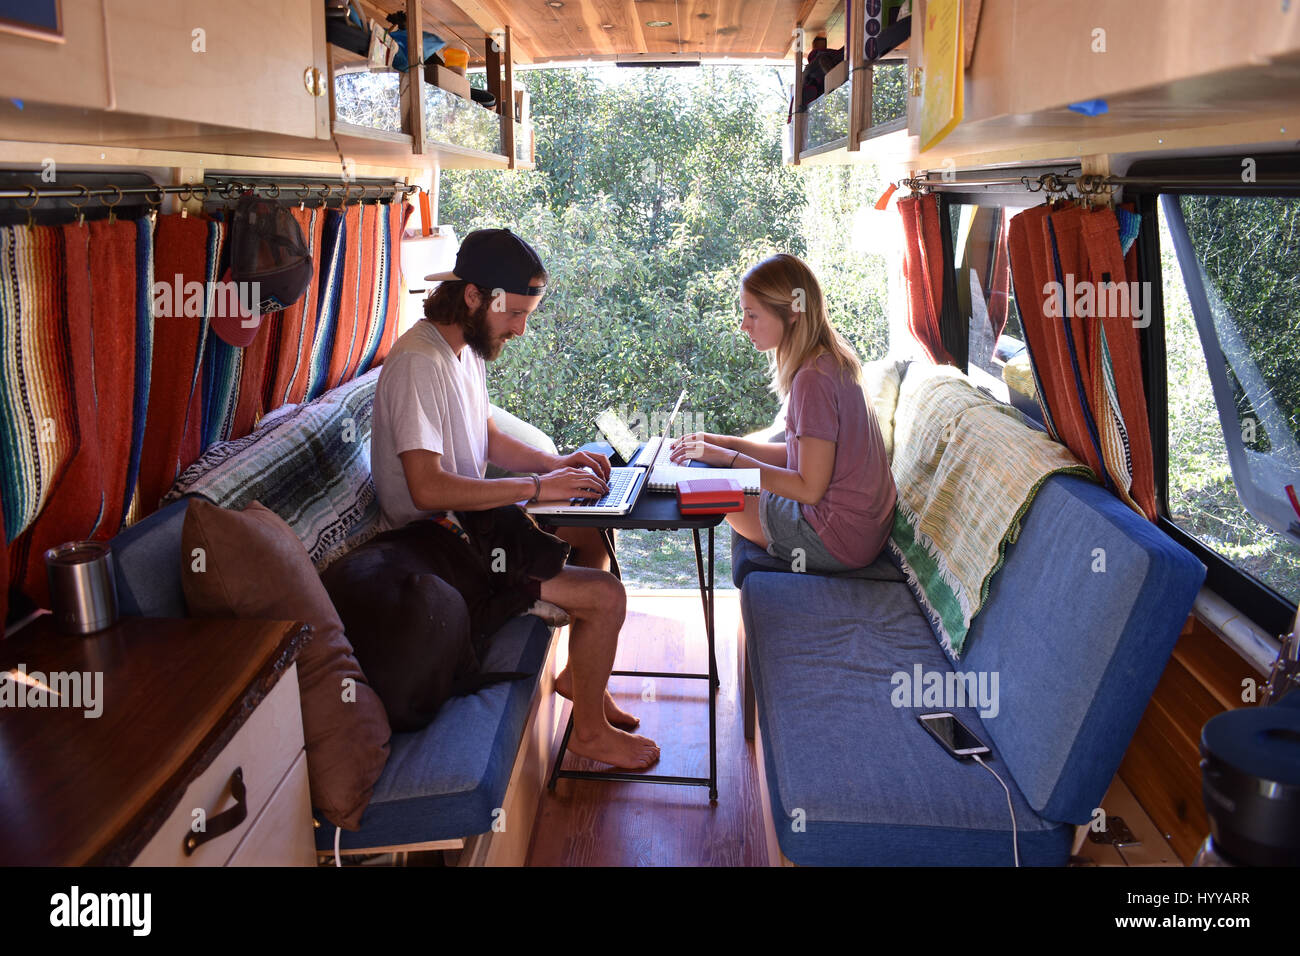 MEET the couple who shunned traditional office jobs and spent $5,000 converting their Dodge Sprinter van into a home to live life on the road with their beloved pet dog. The series of envy inducing pictures and video show Pete Thuli (24) and Taylor Bucher (23) also known as Always the Road from Wisconsin, USA enjoying life on the road as they travel around the states of America with their American Staffordshire Terrier, Snoop. Other shots show how the couple worked for four months whilst both holding down full time jobs to refurbish the van’s shell into a fully functional home complete with ki Stock Photo